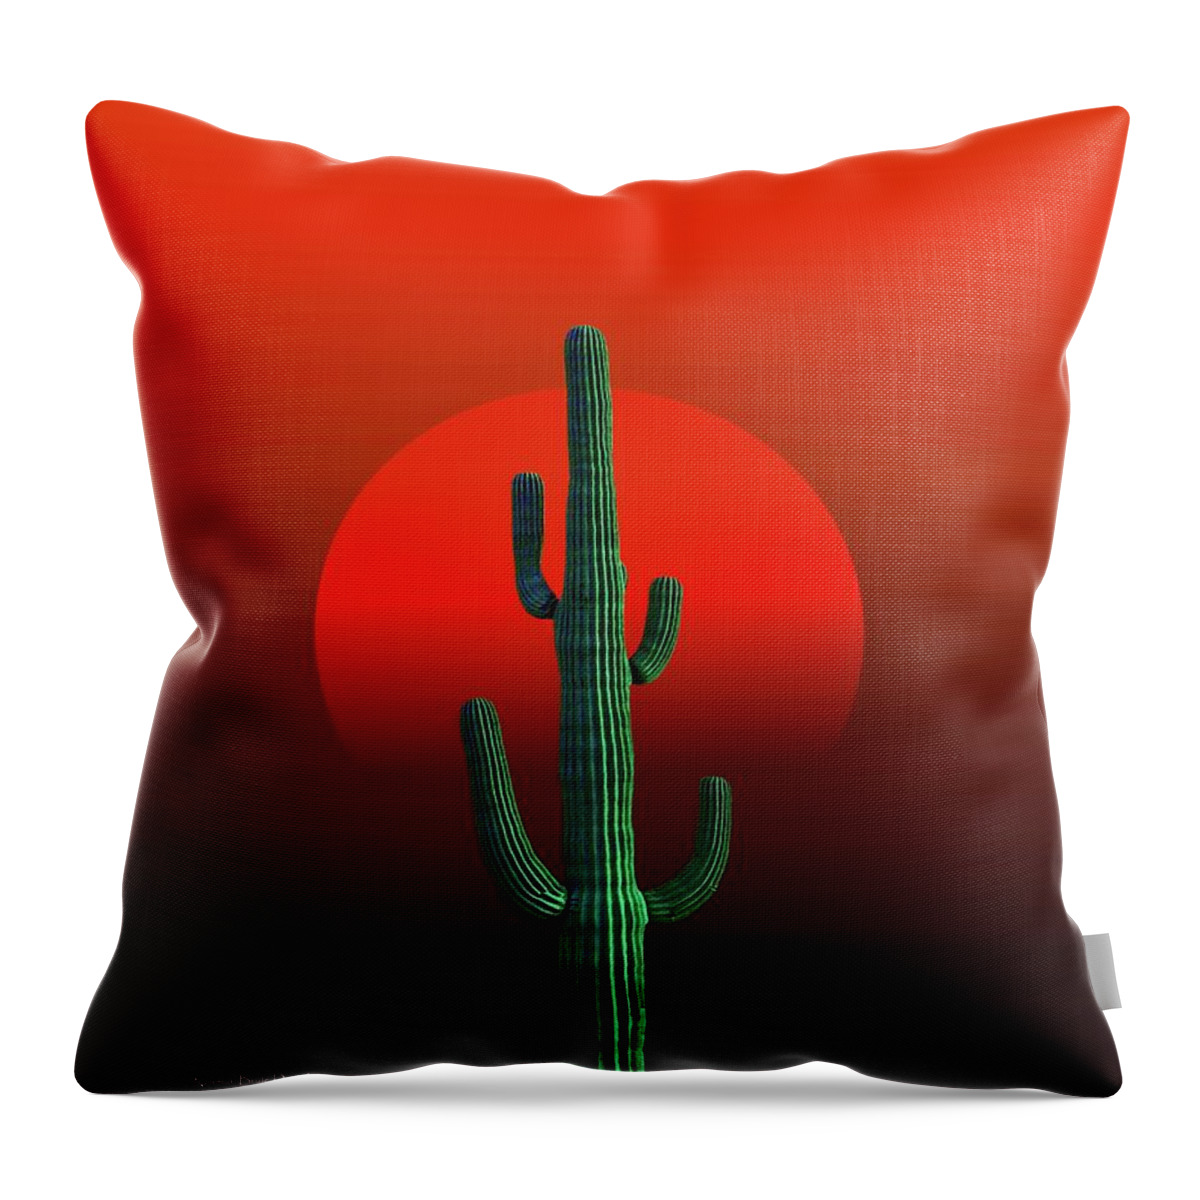 Cactus Throw Pillow featuring the digital art Sunguaro by Norman Brule